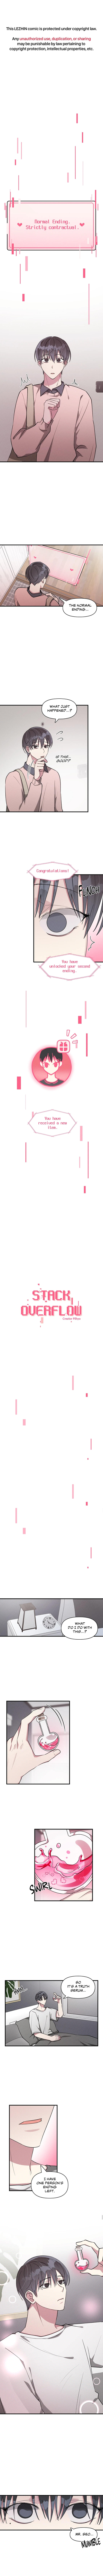 Stack Overflow Chapter 58 - Picture 1